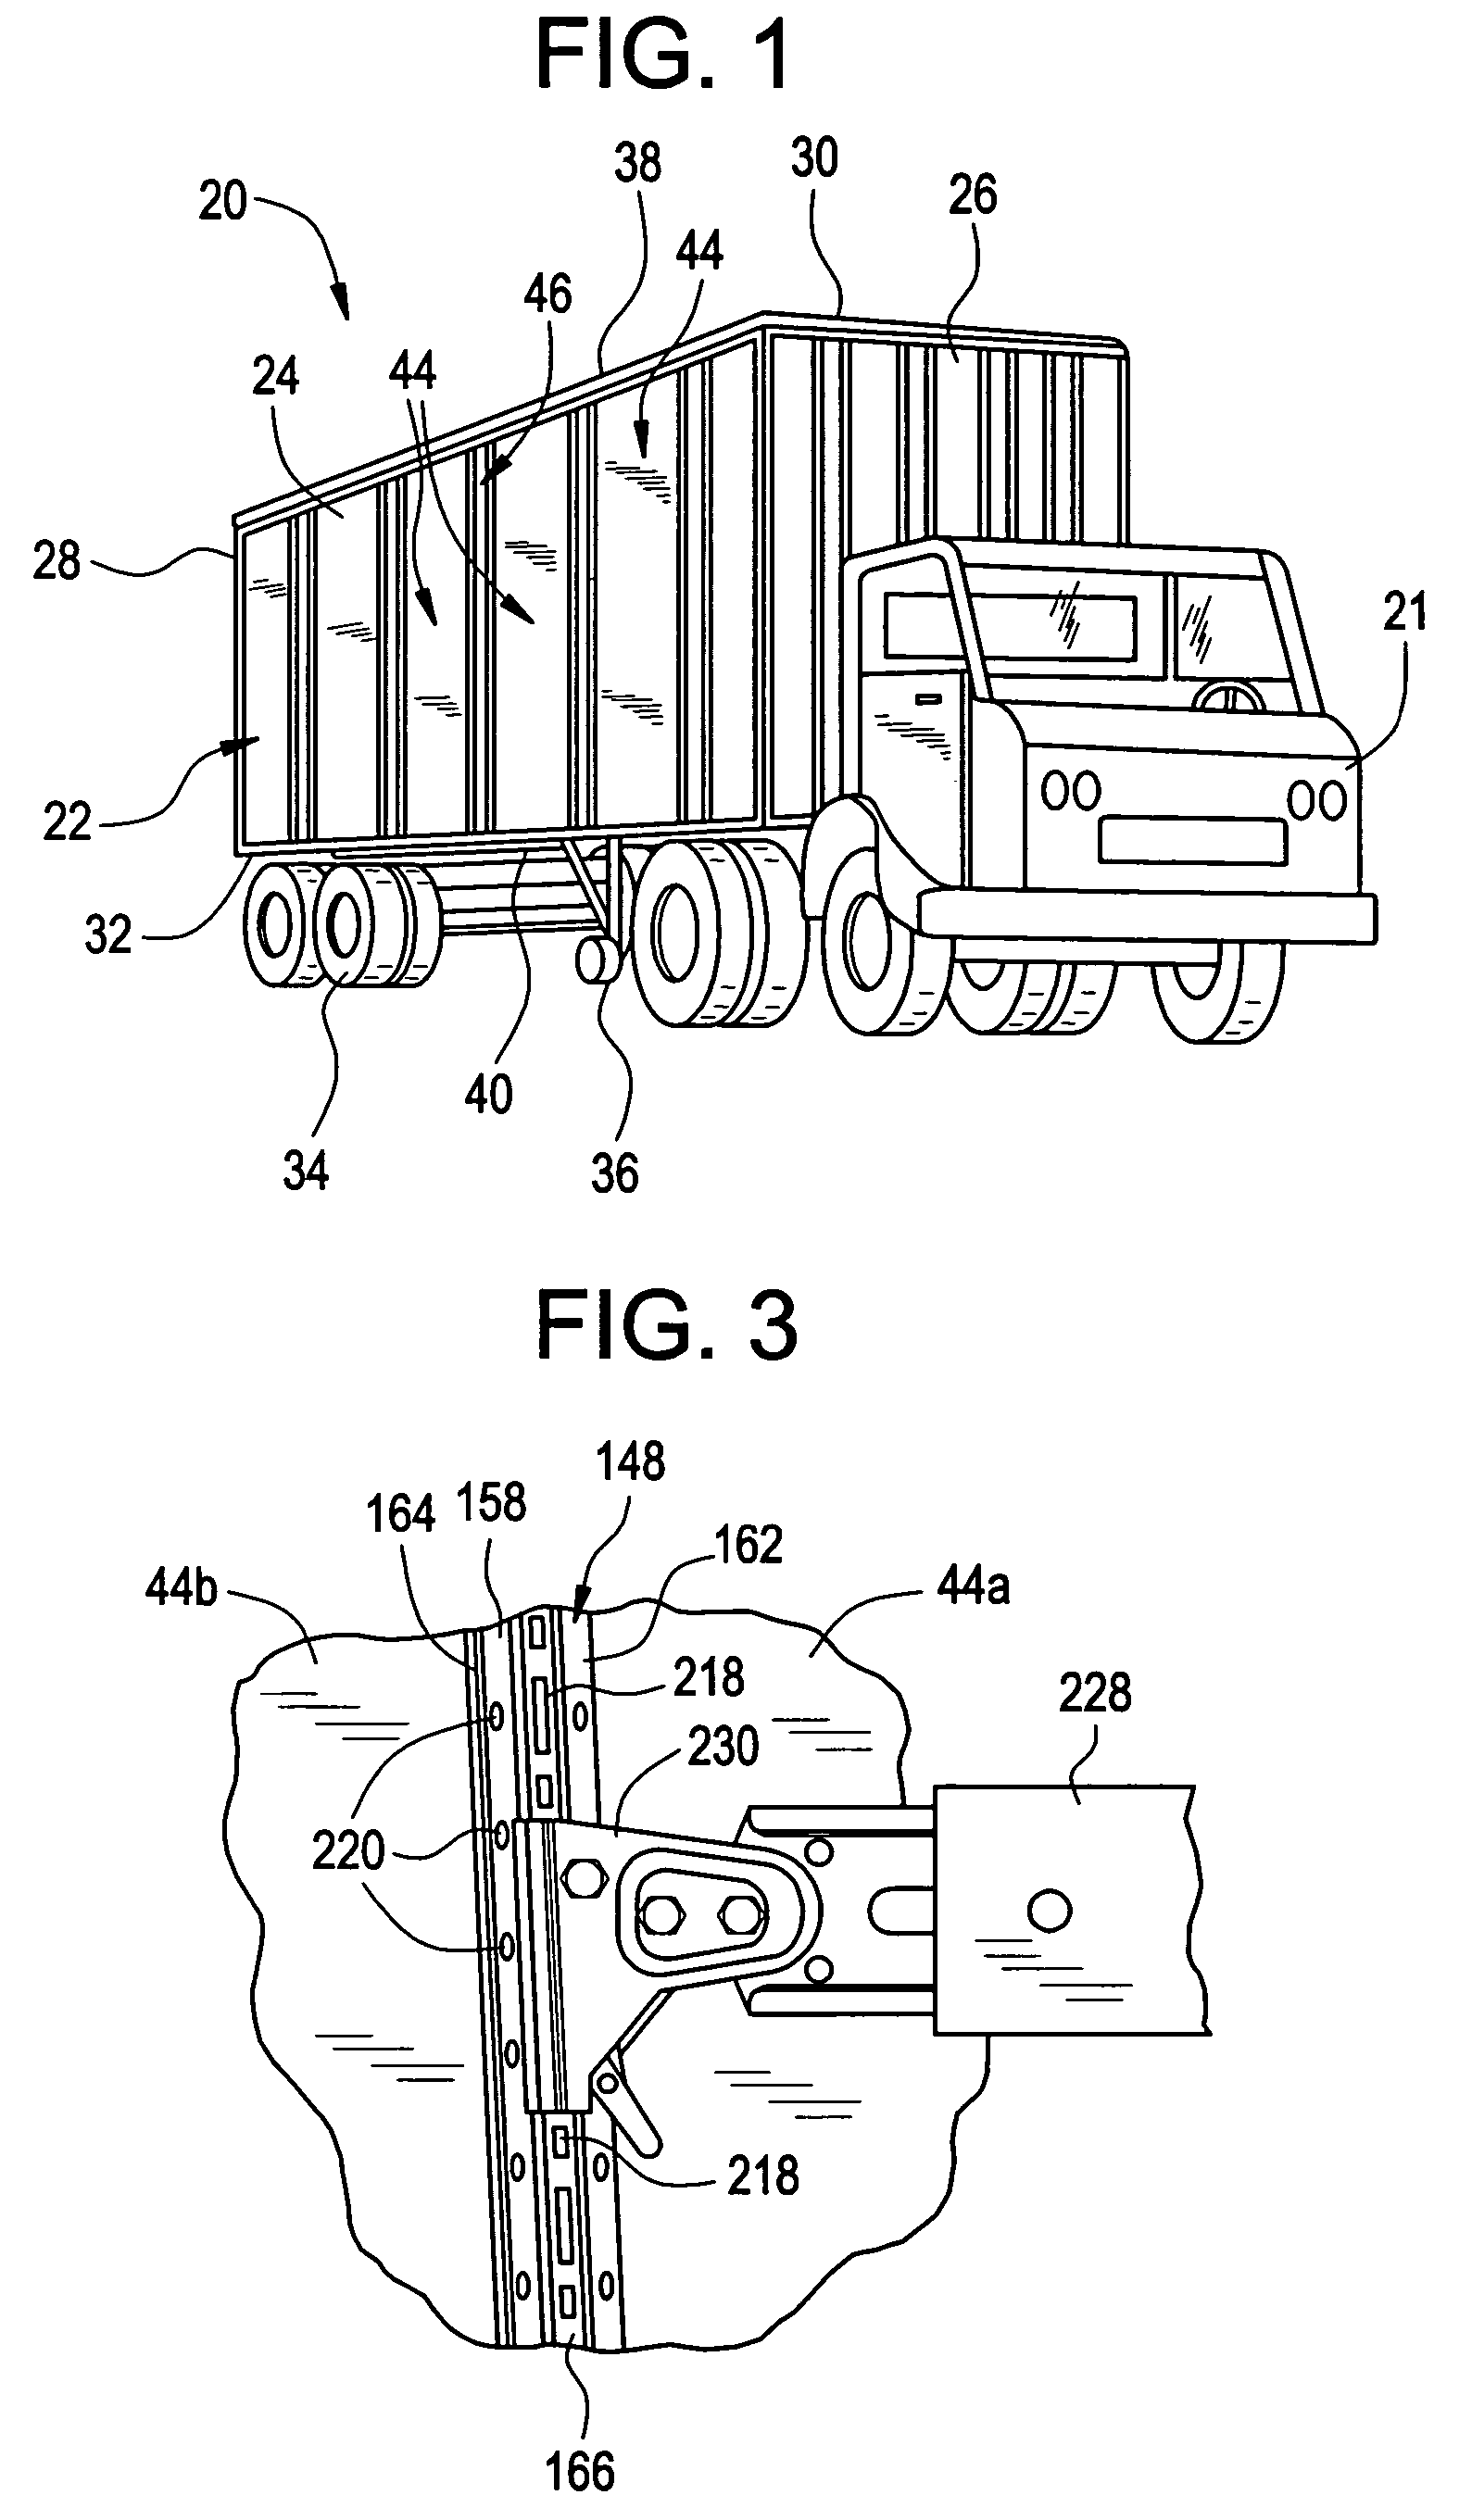 Integrated anchoring system and composite plate for a trailer side wall joint